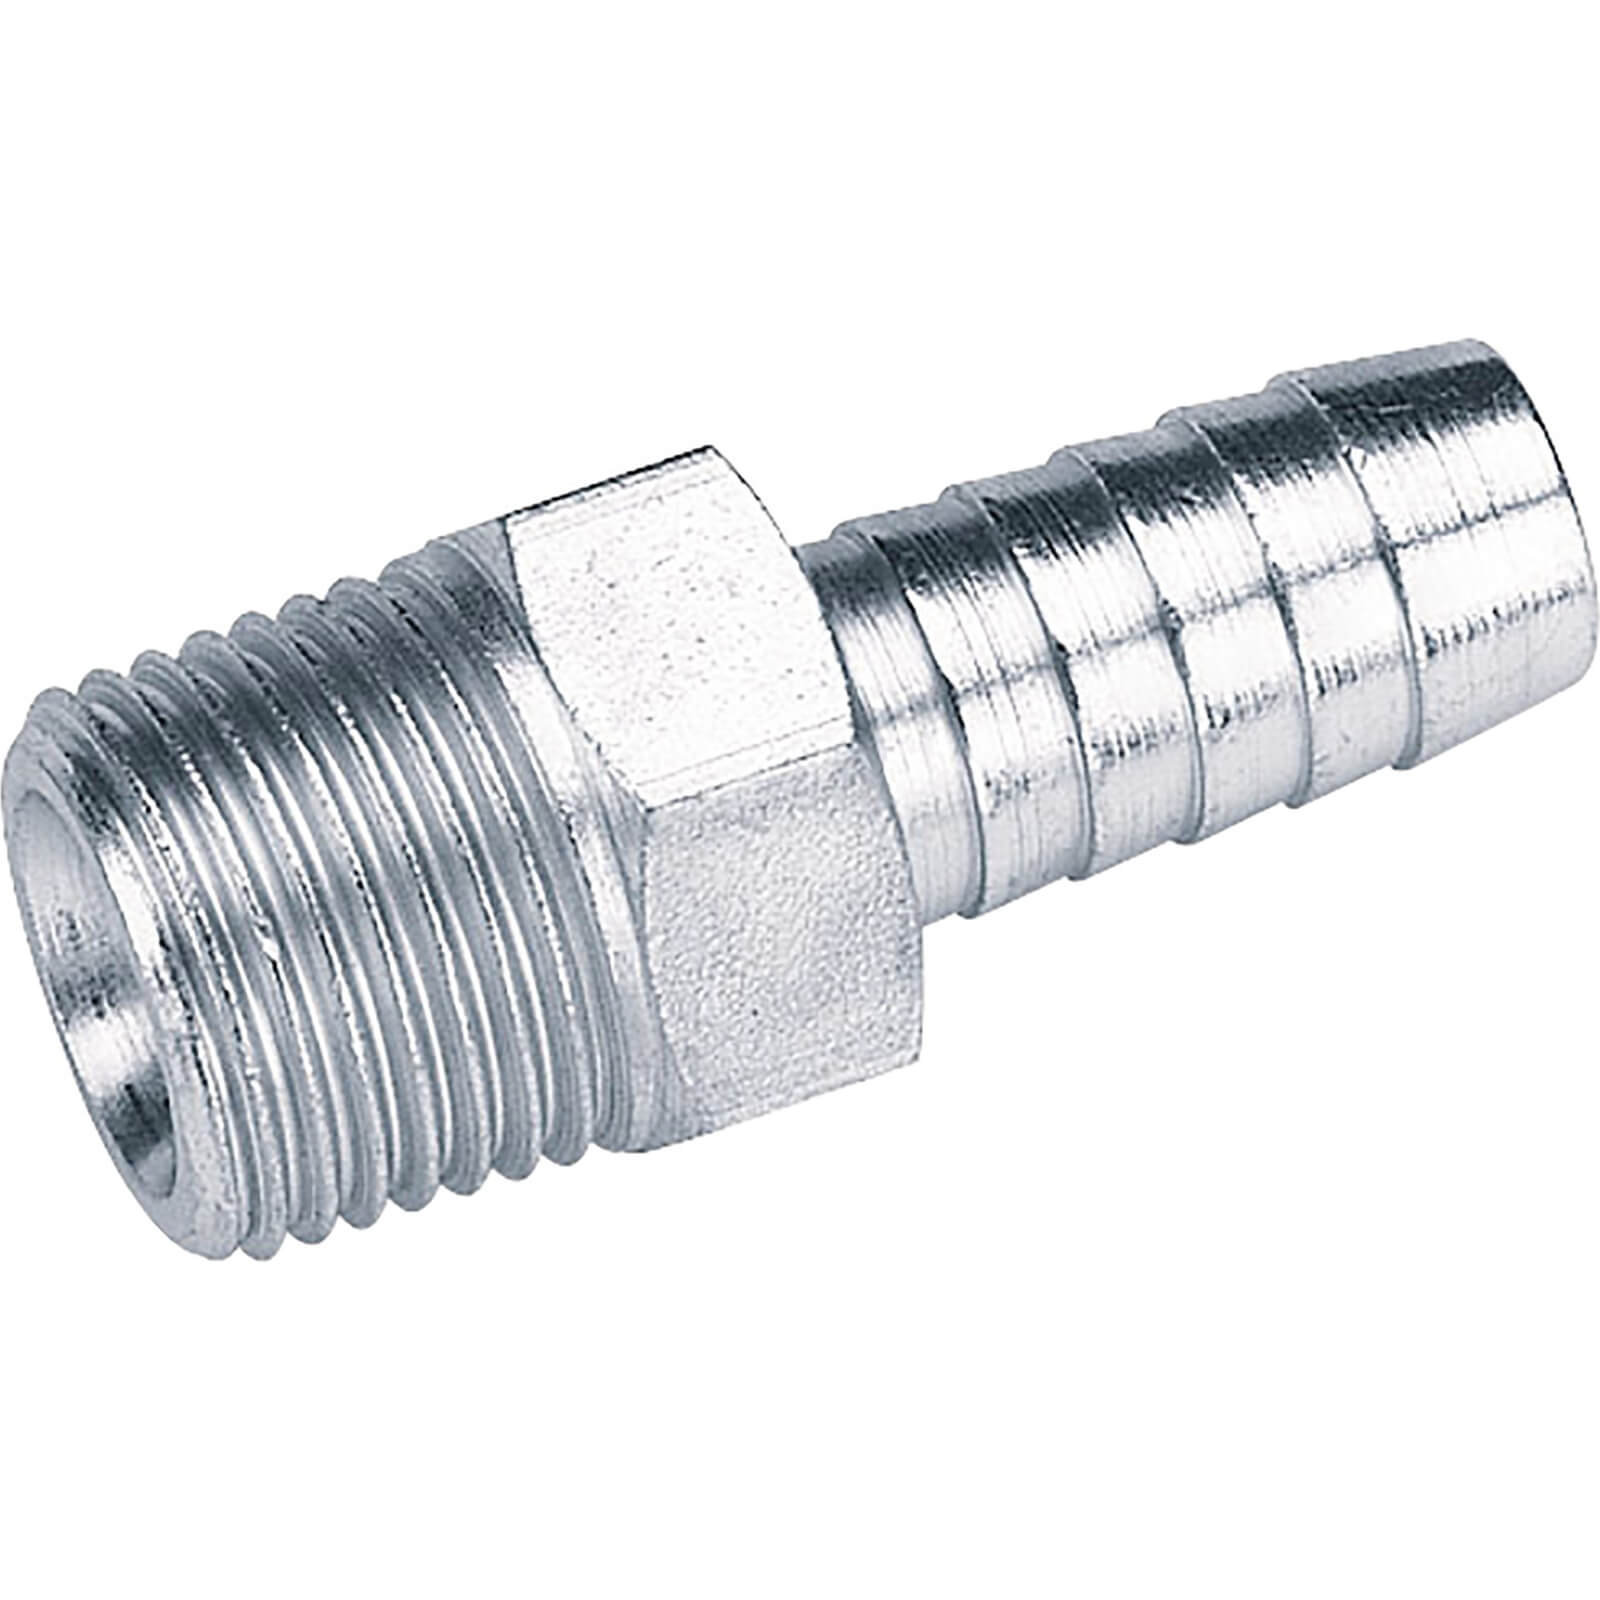 Image of Draper PCL Tailpiece Air Line Fitting BSPT Male Thread 1/2" BSP 1/2" Pack of 3